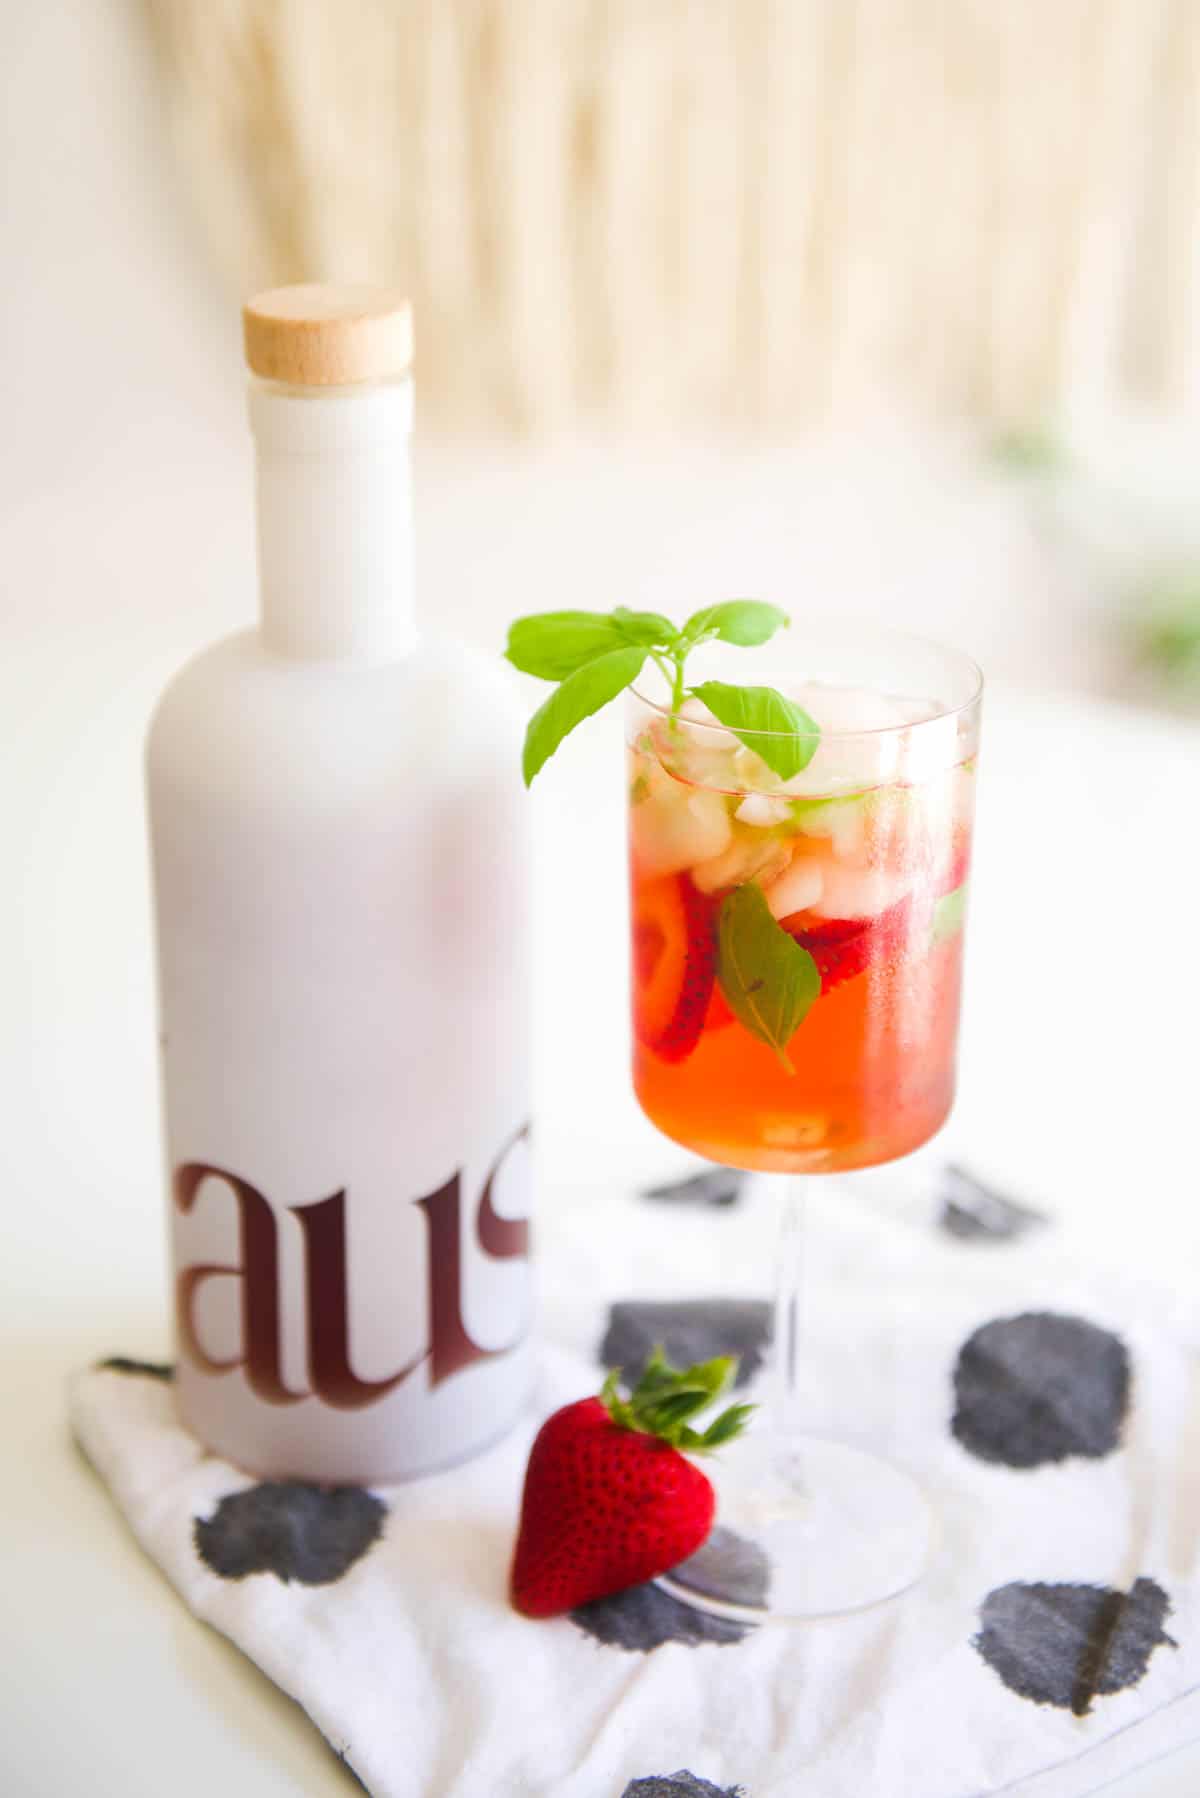 A wine glass on a table with a strawberry basil cocktail next to a bottle of liquor.